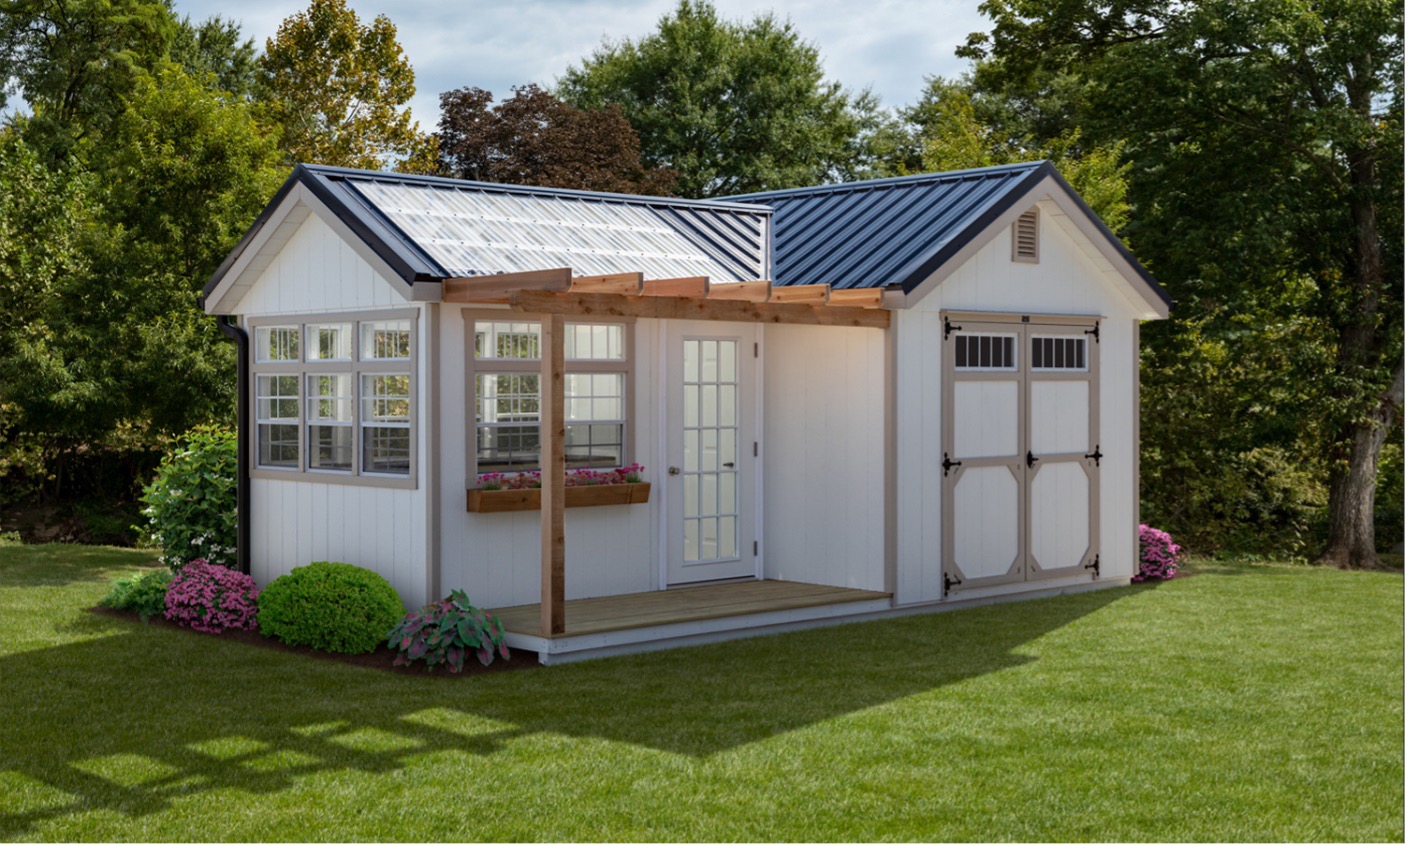 Why Choose a Shed and Greenhouse Combo